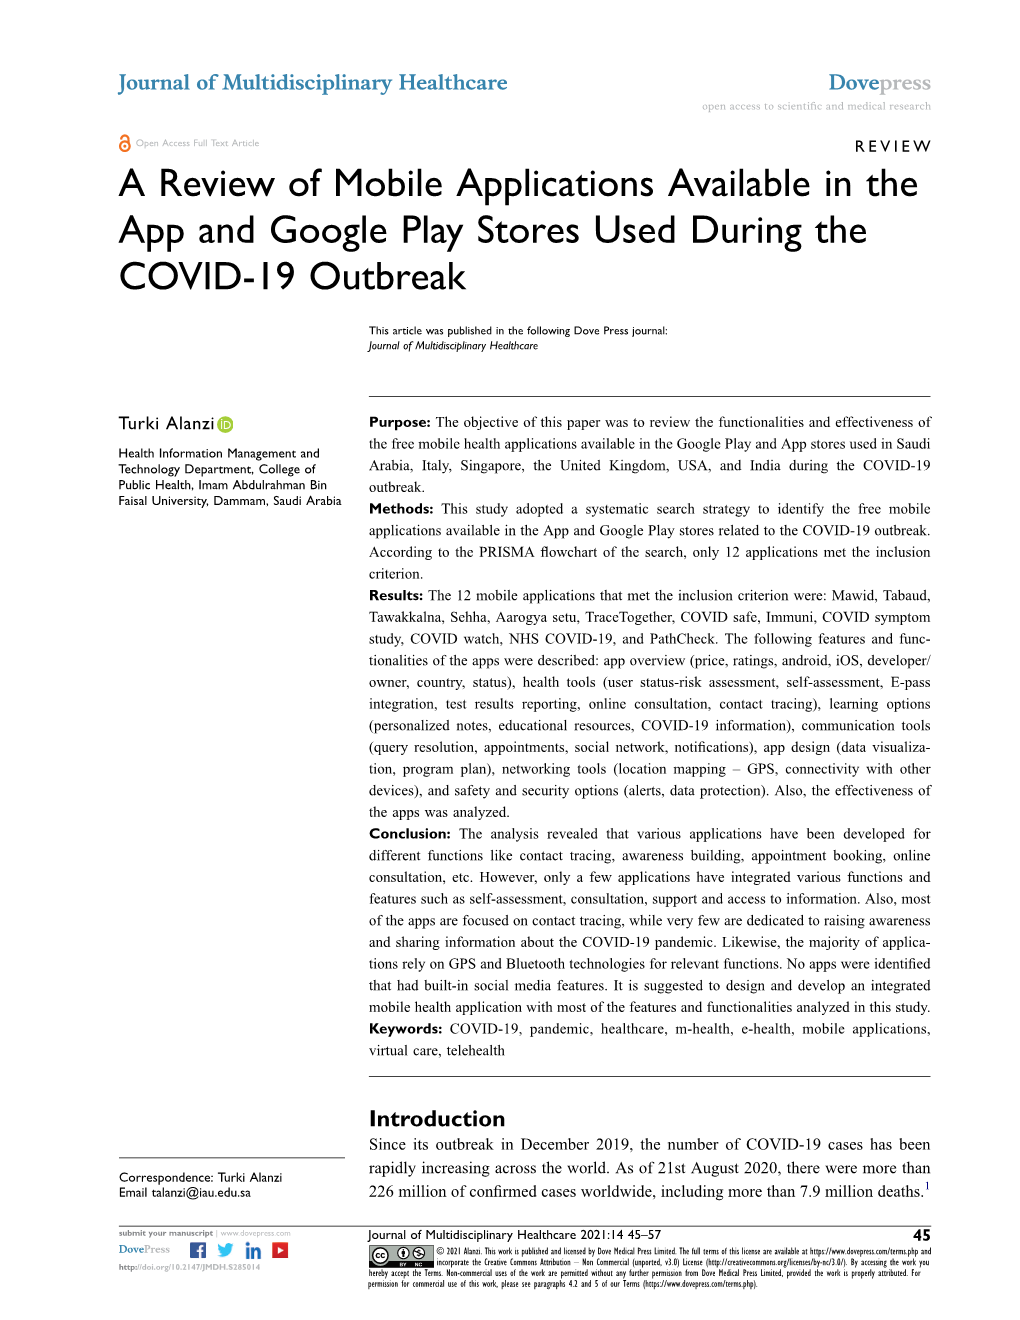 A Review of Mobile Applications Available in the App and Google Play Stores Used During the COVID-19 Outbreak